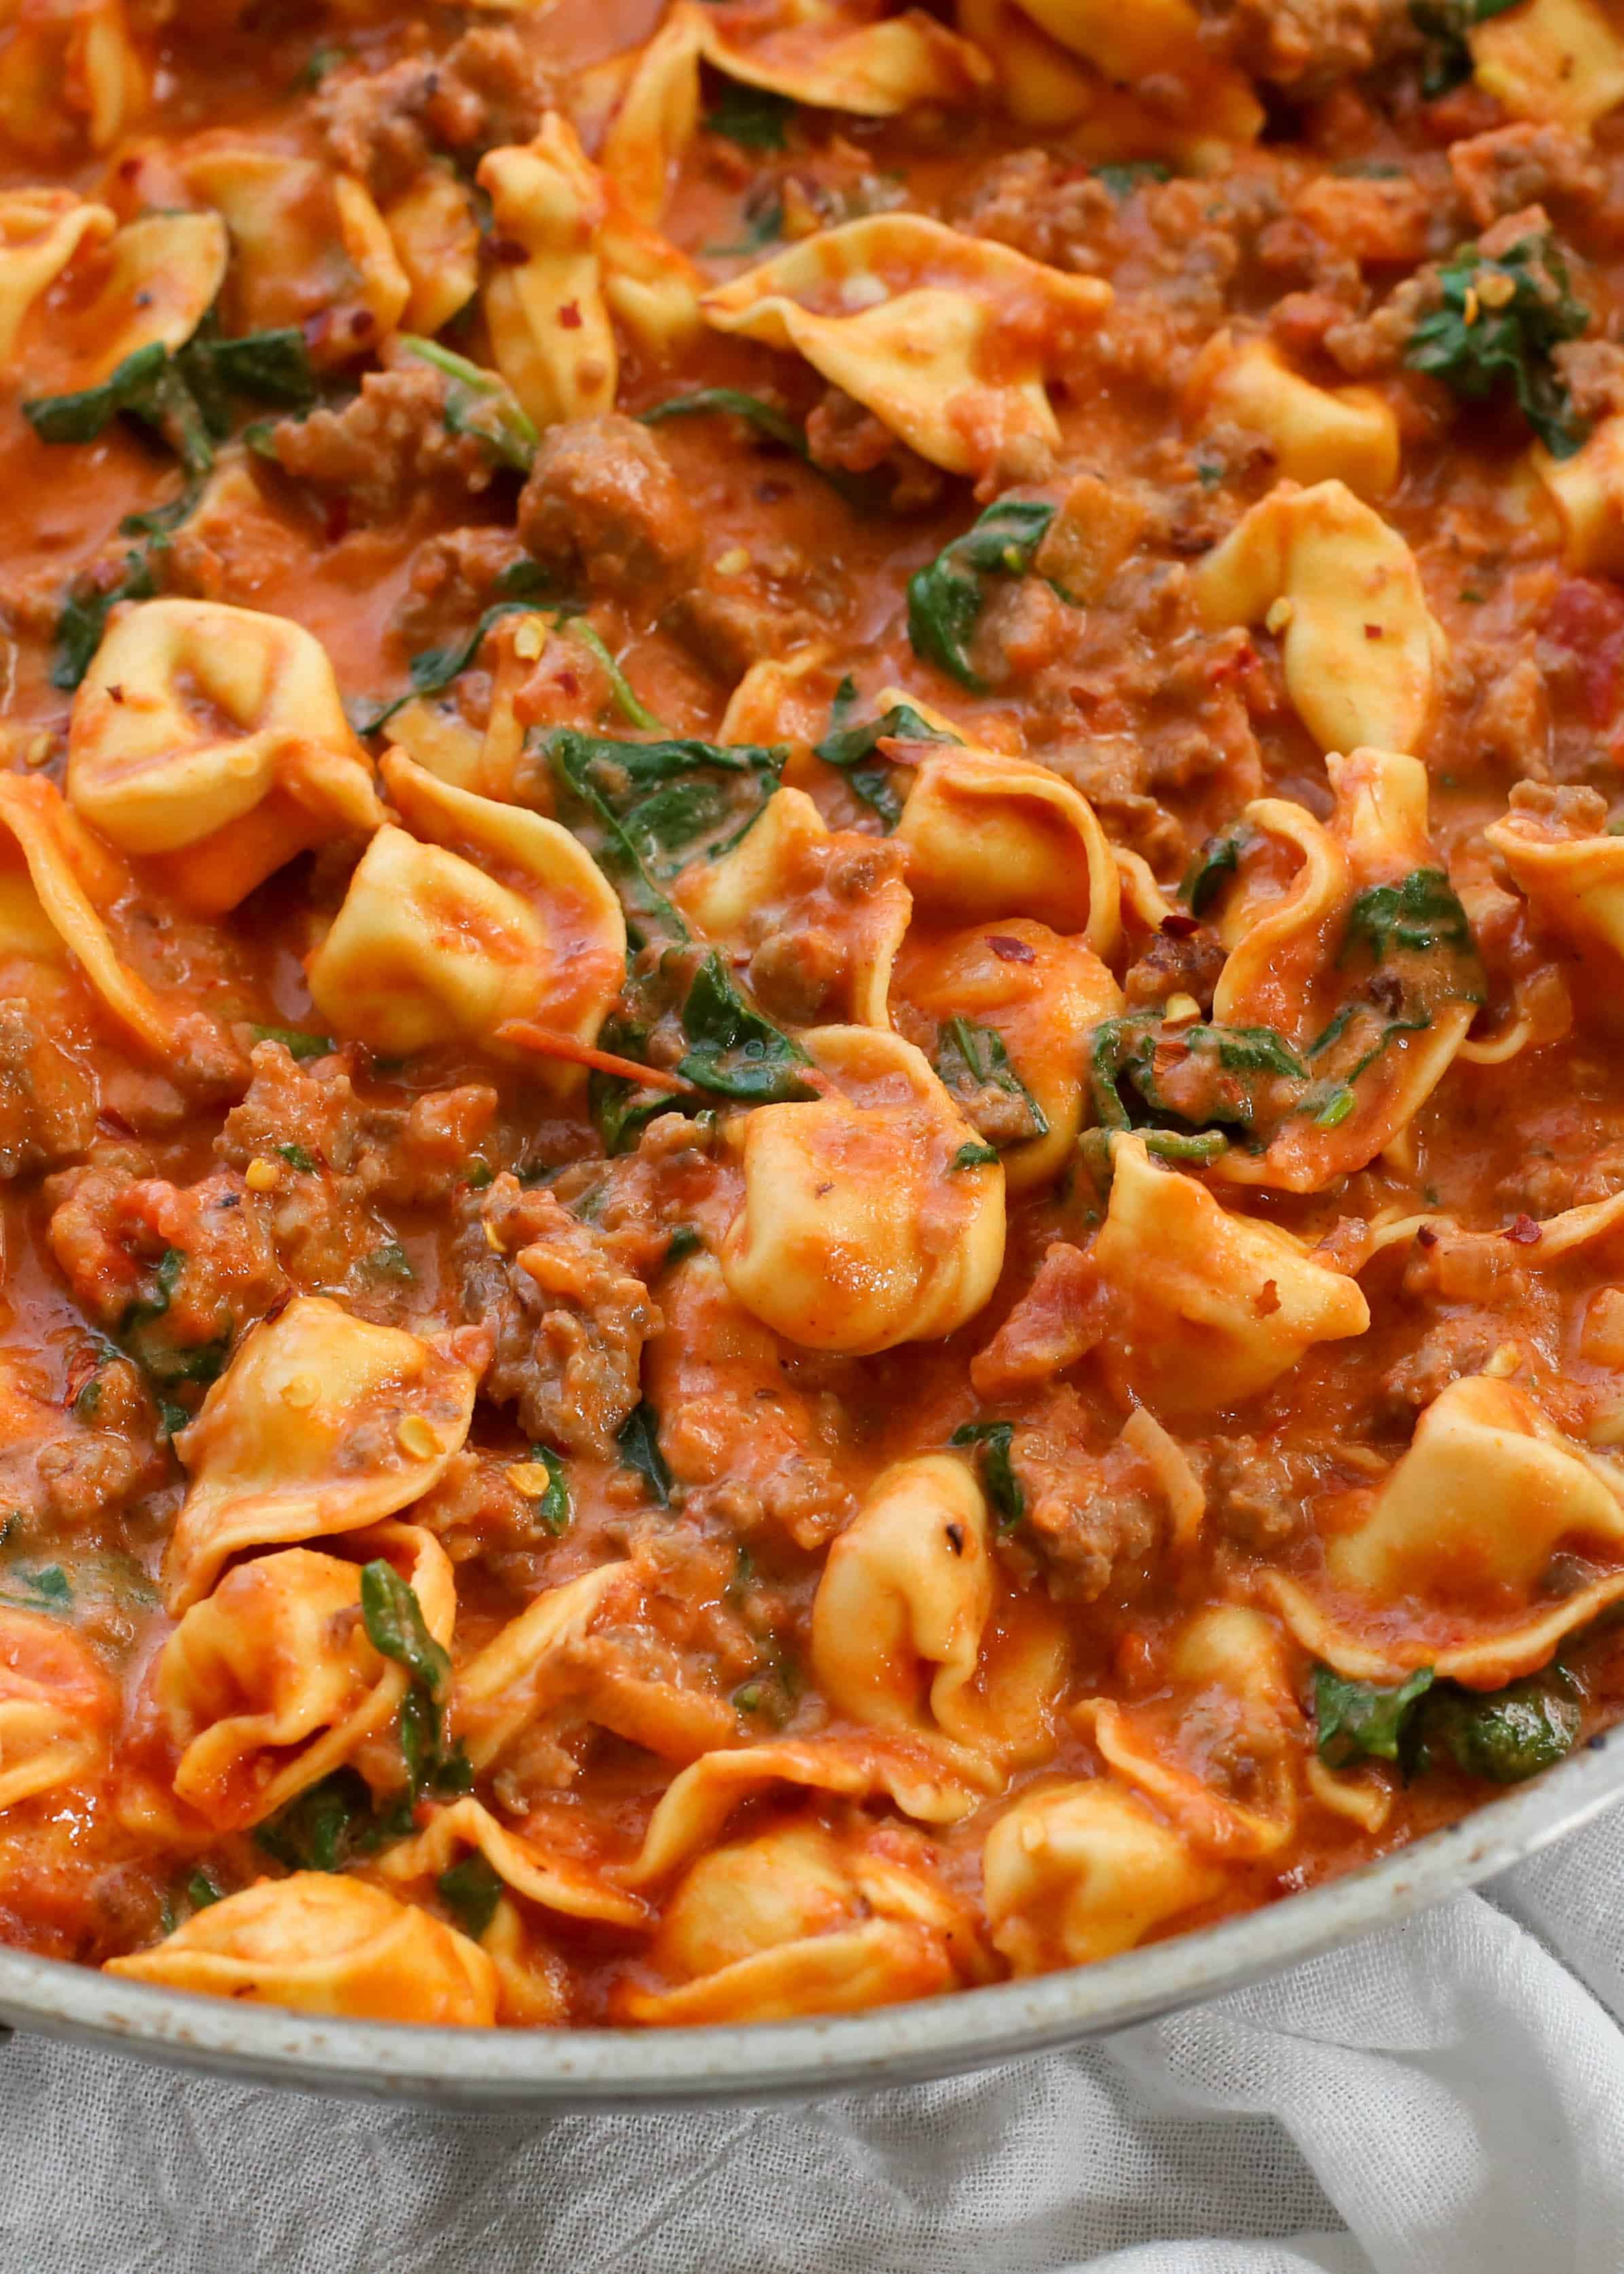 Sausage, Tortellini, and Spinach in a Creamy Tomato Sauce ...